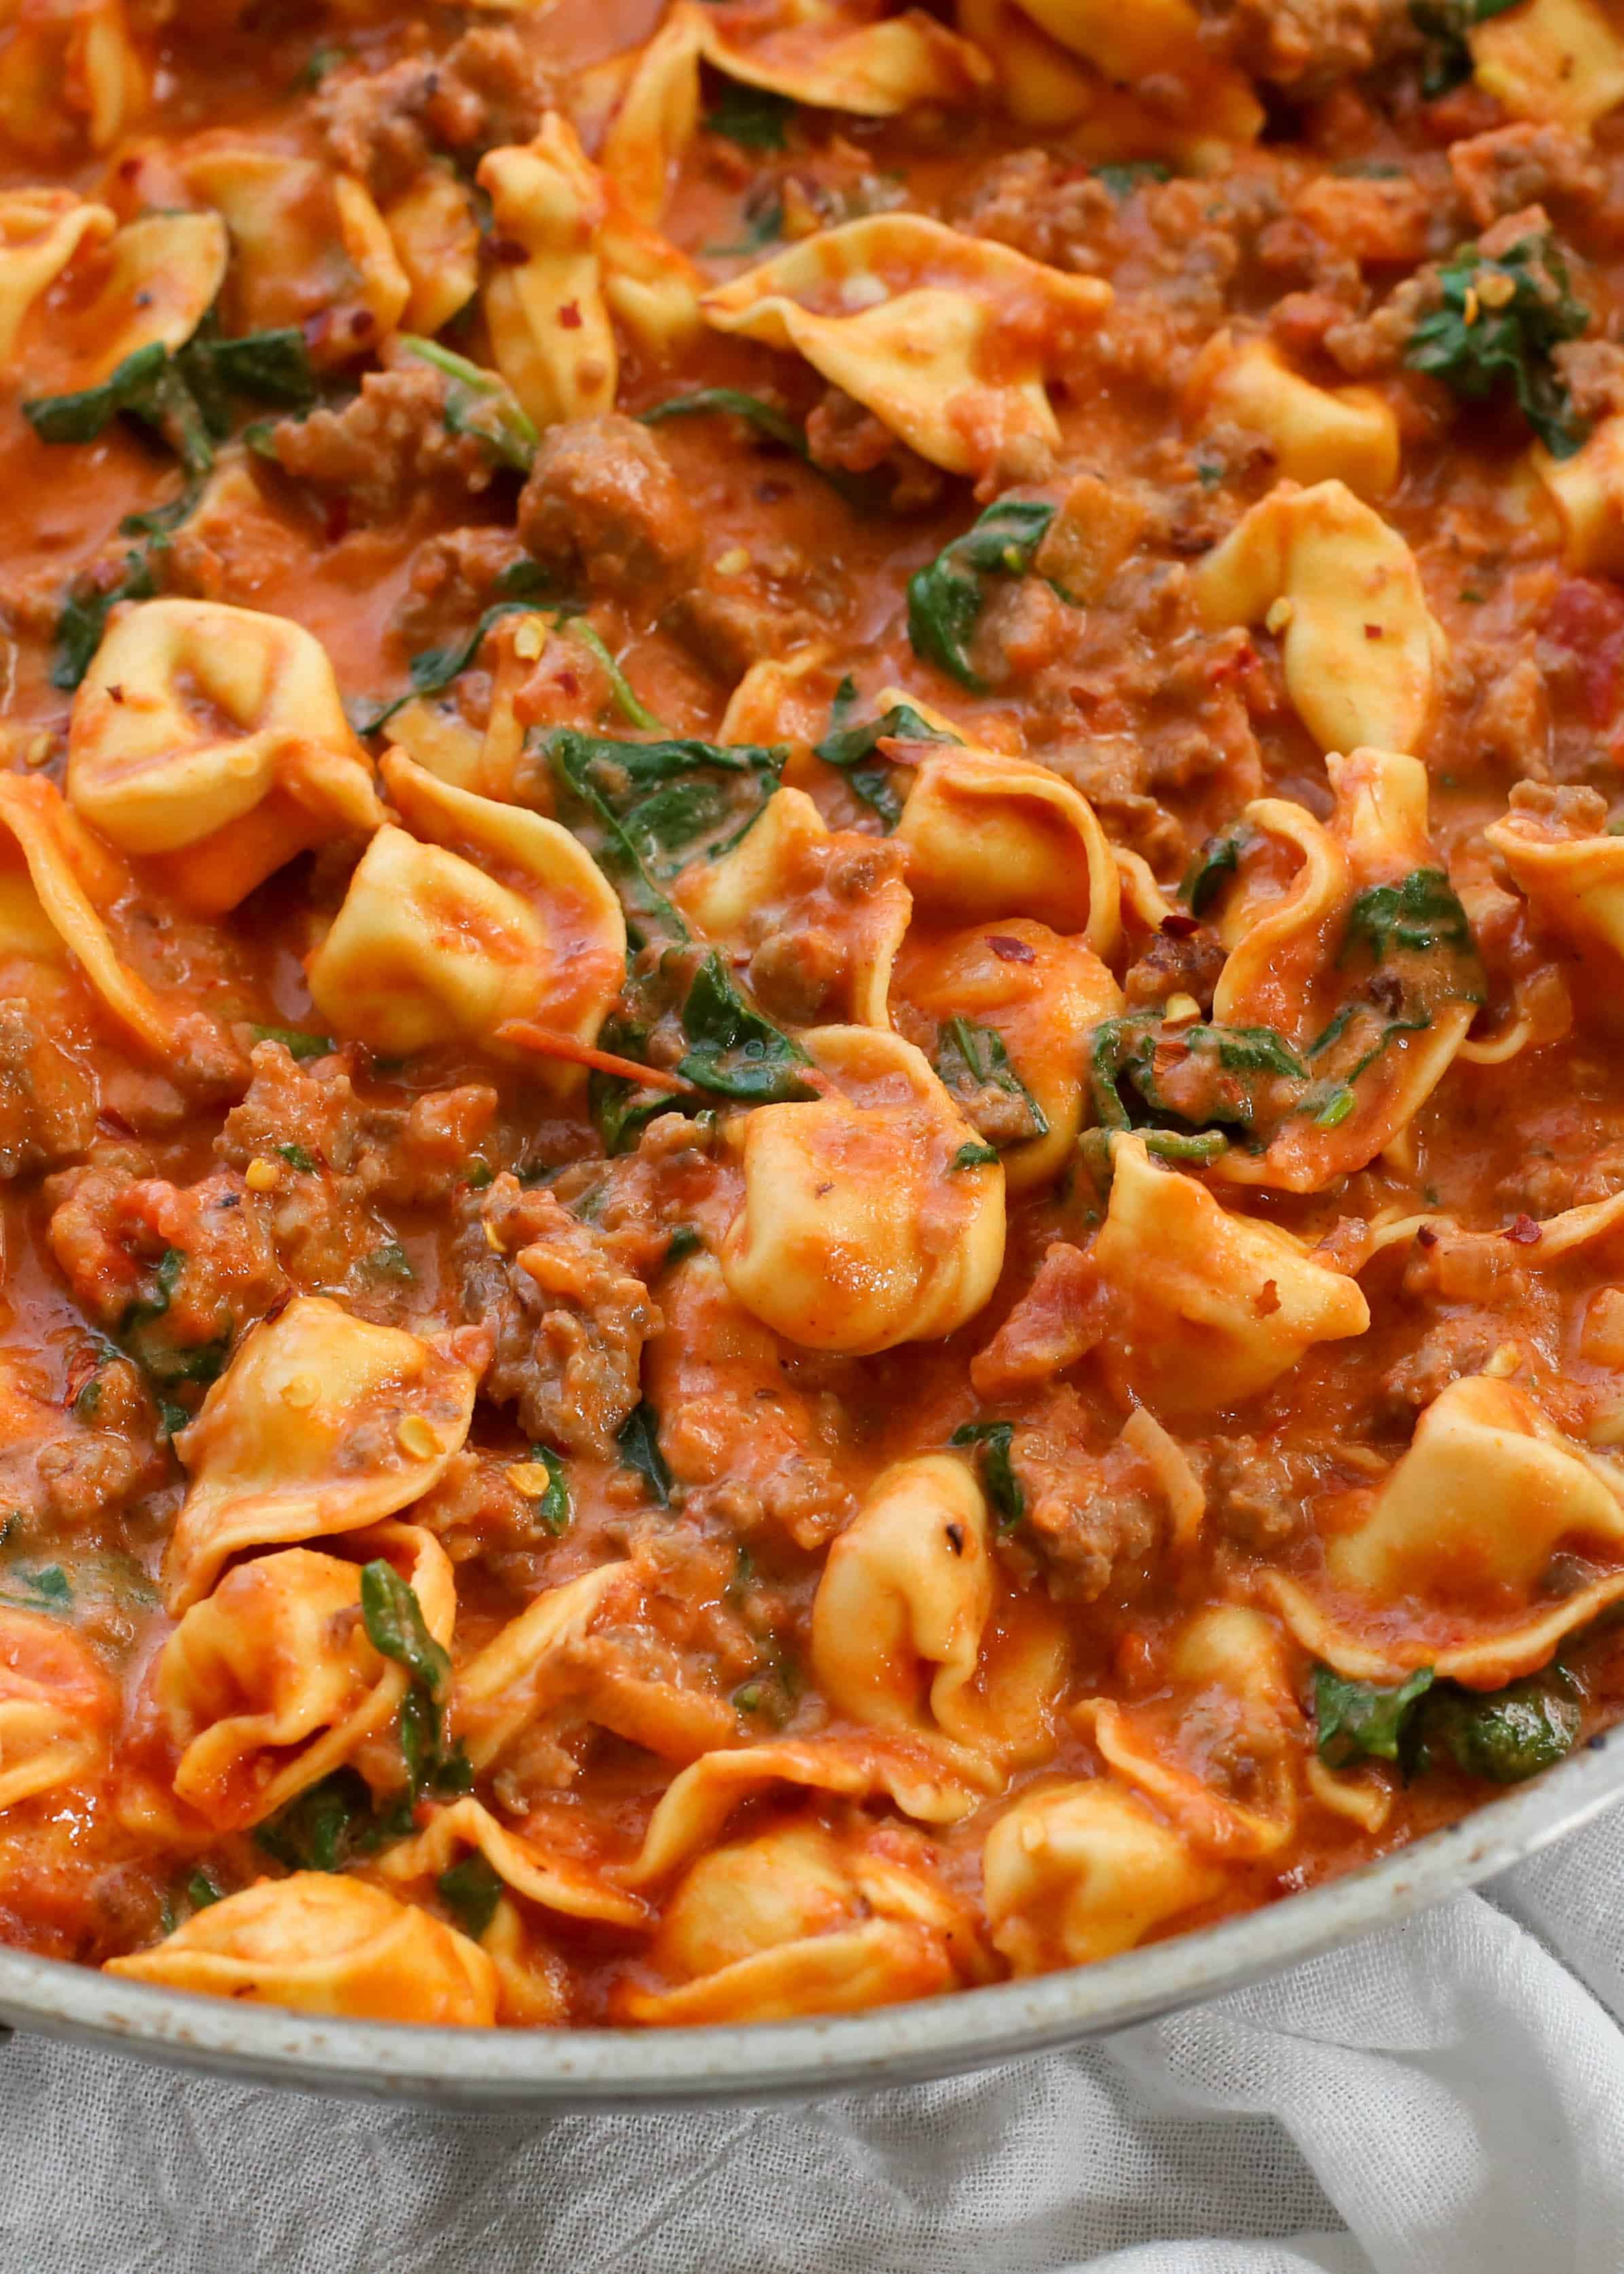 Sausage, Tortellini, and Spinach in a Creamy Tomato Sauce ...